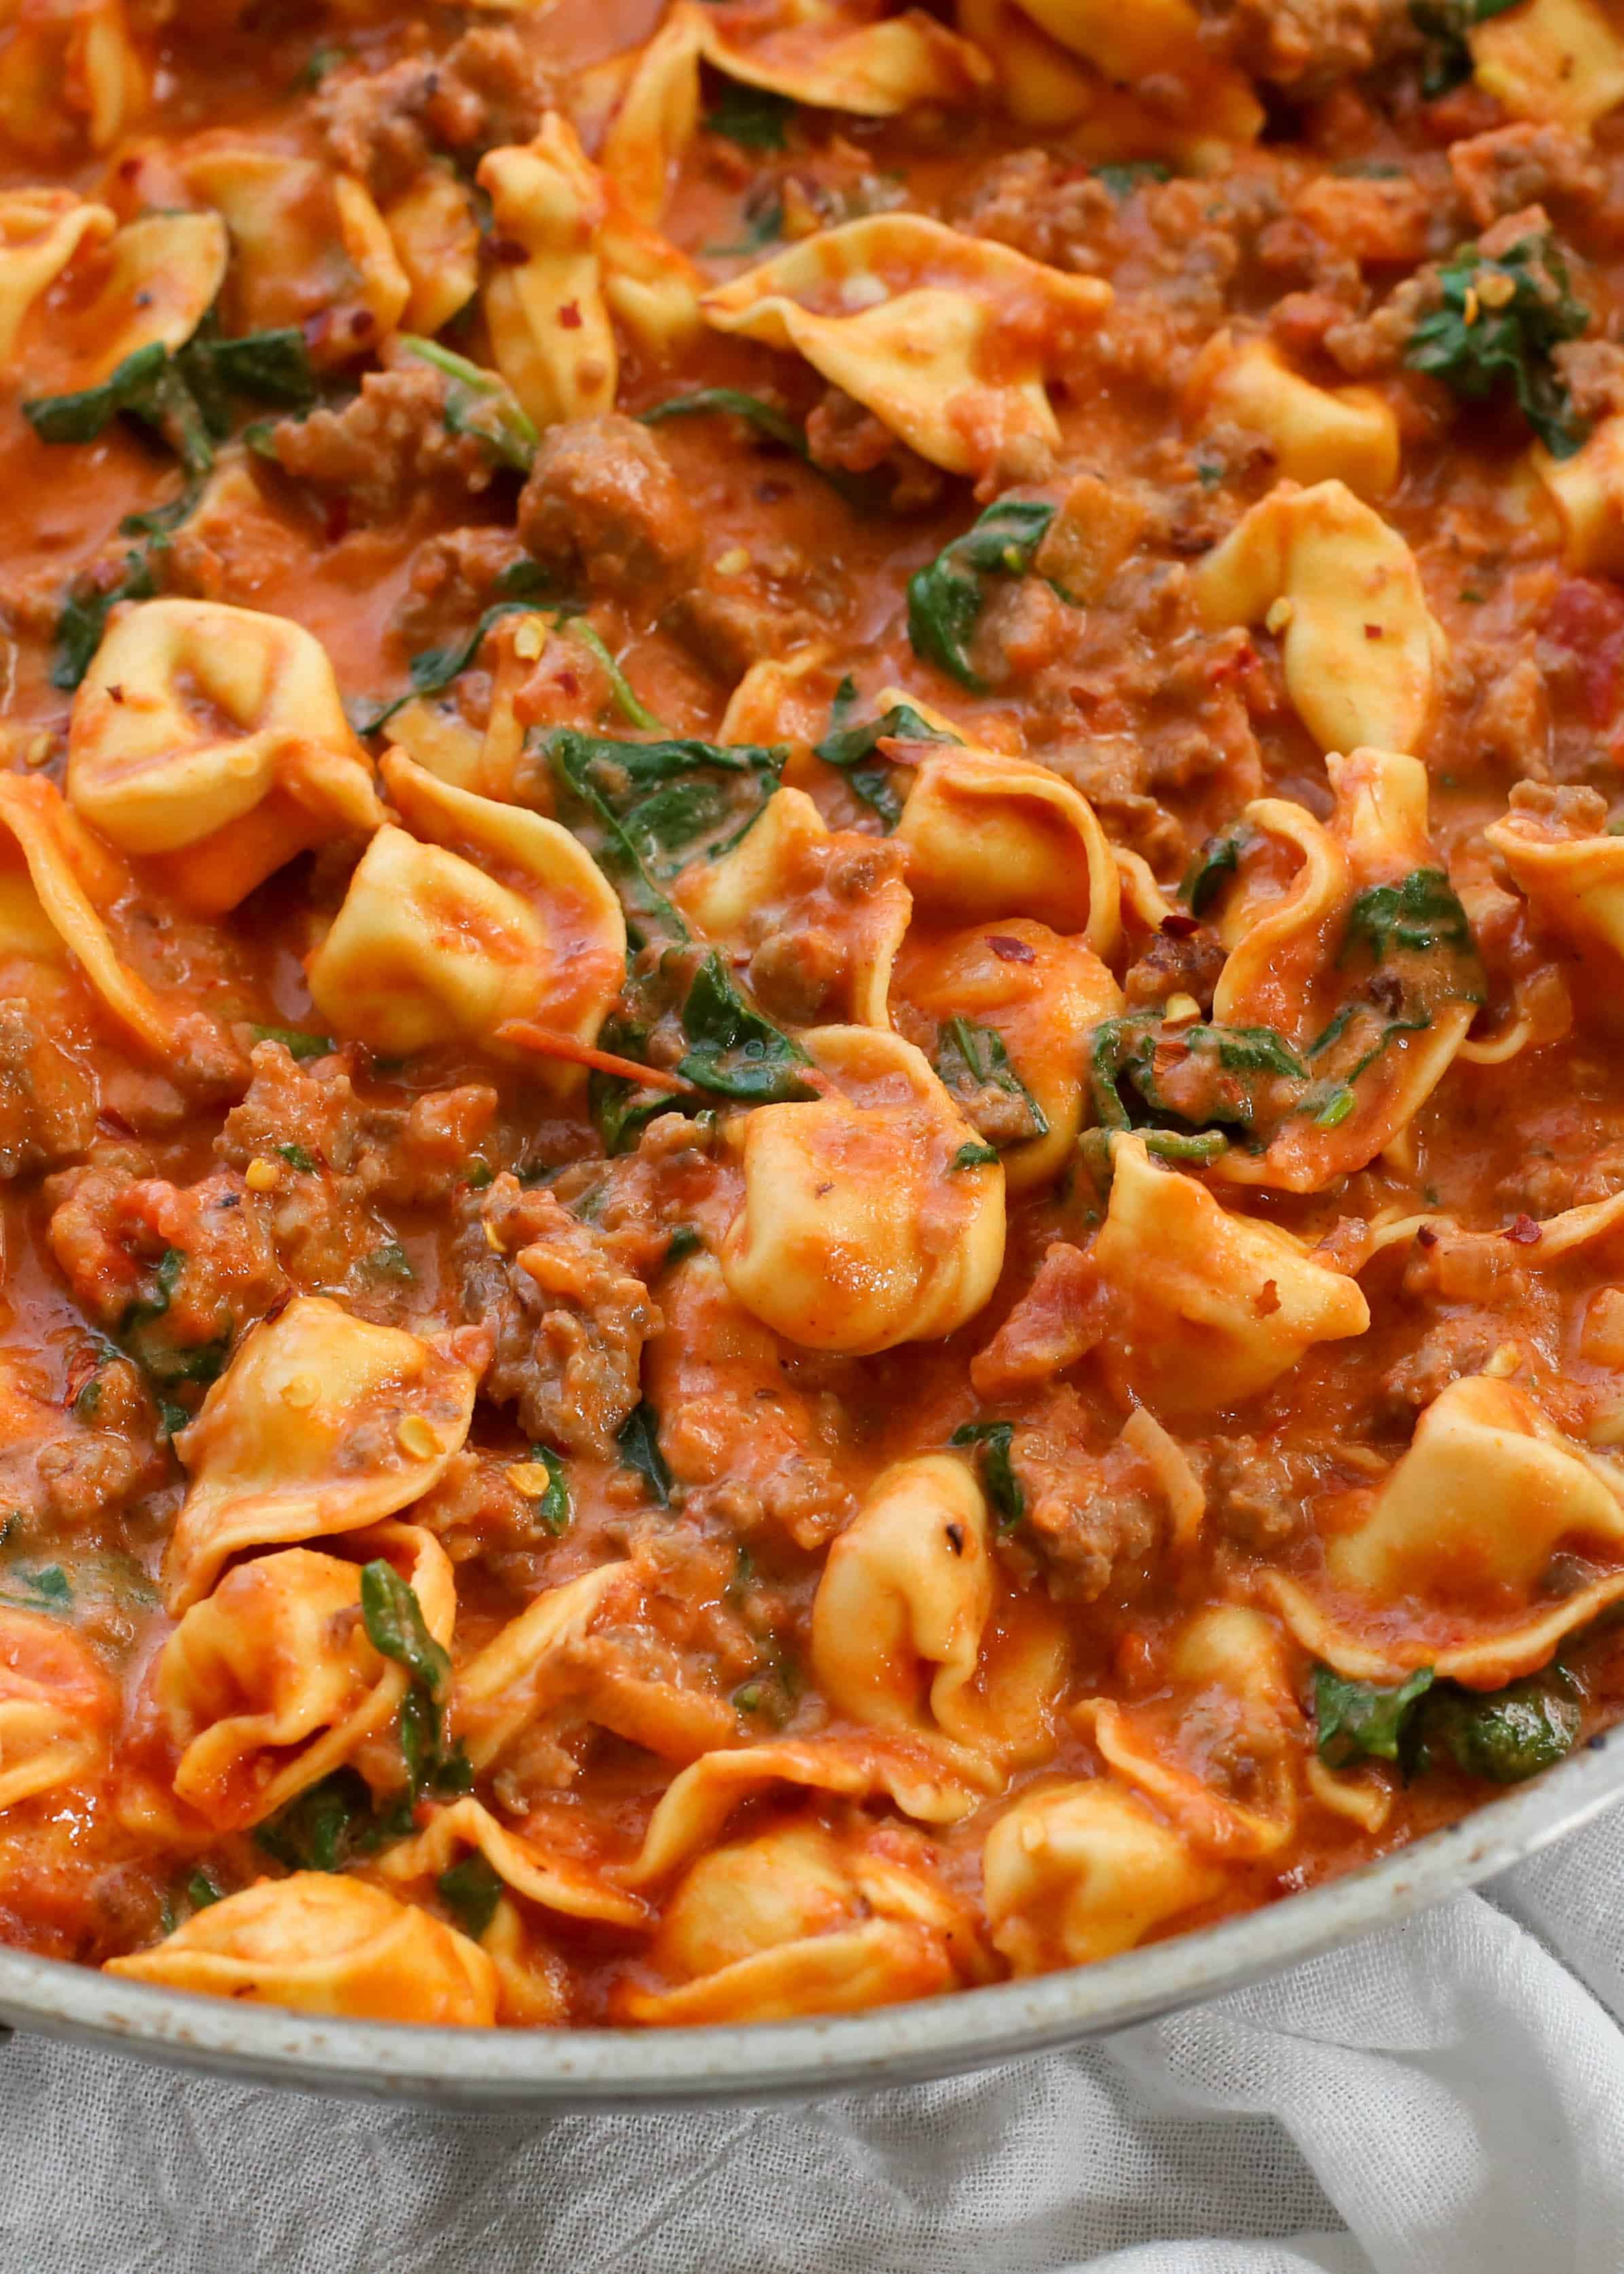 Sausage, Tortellini, and Spinach in a Creamy Tomato Sauce ...